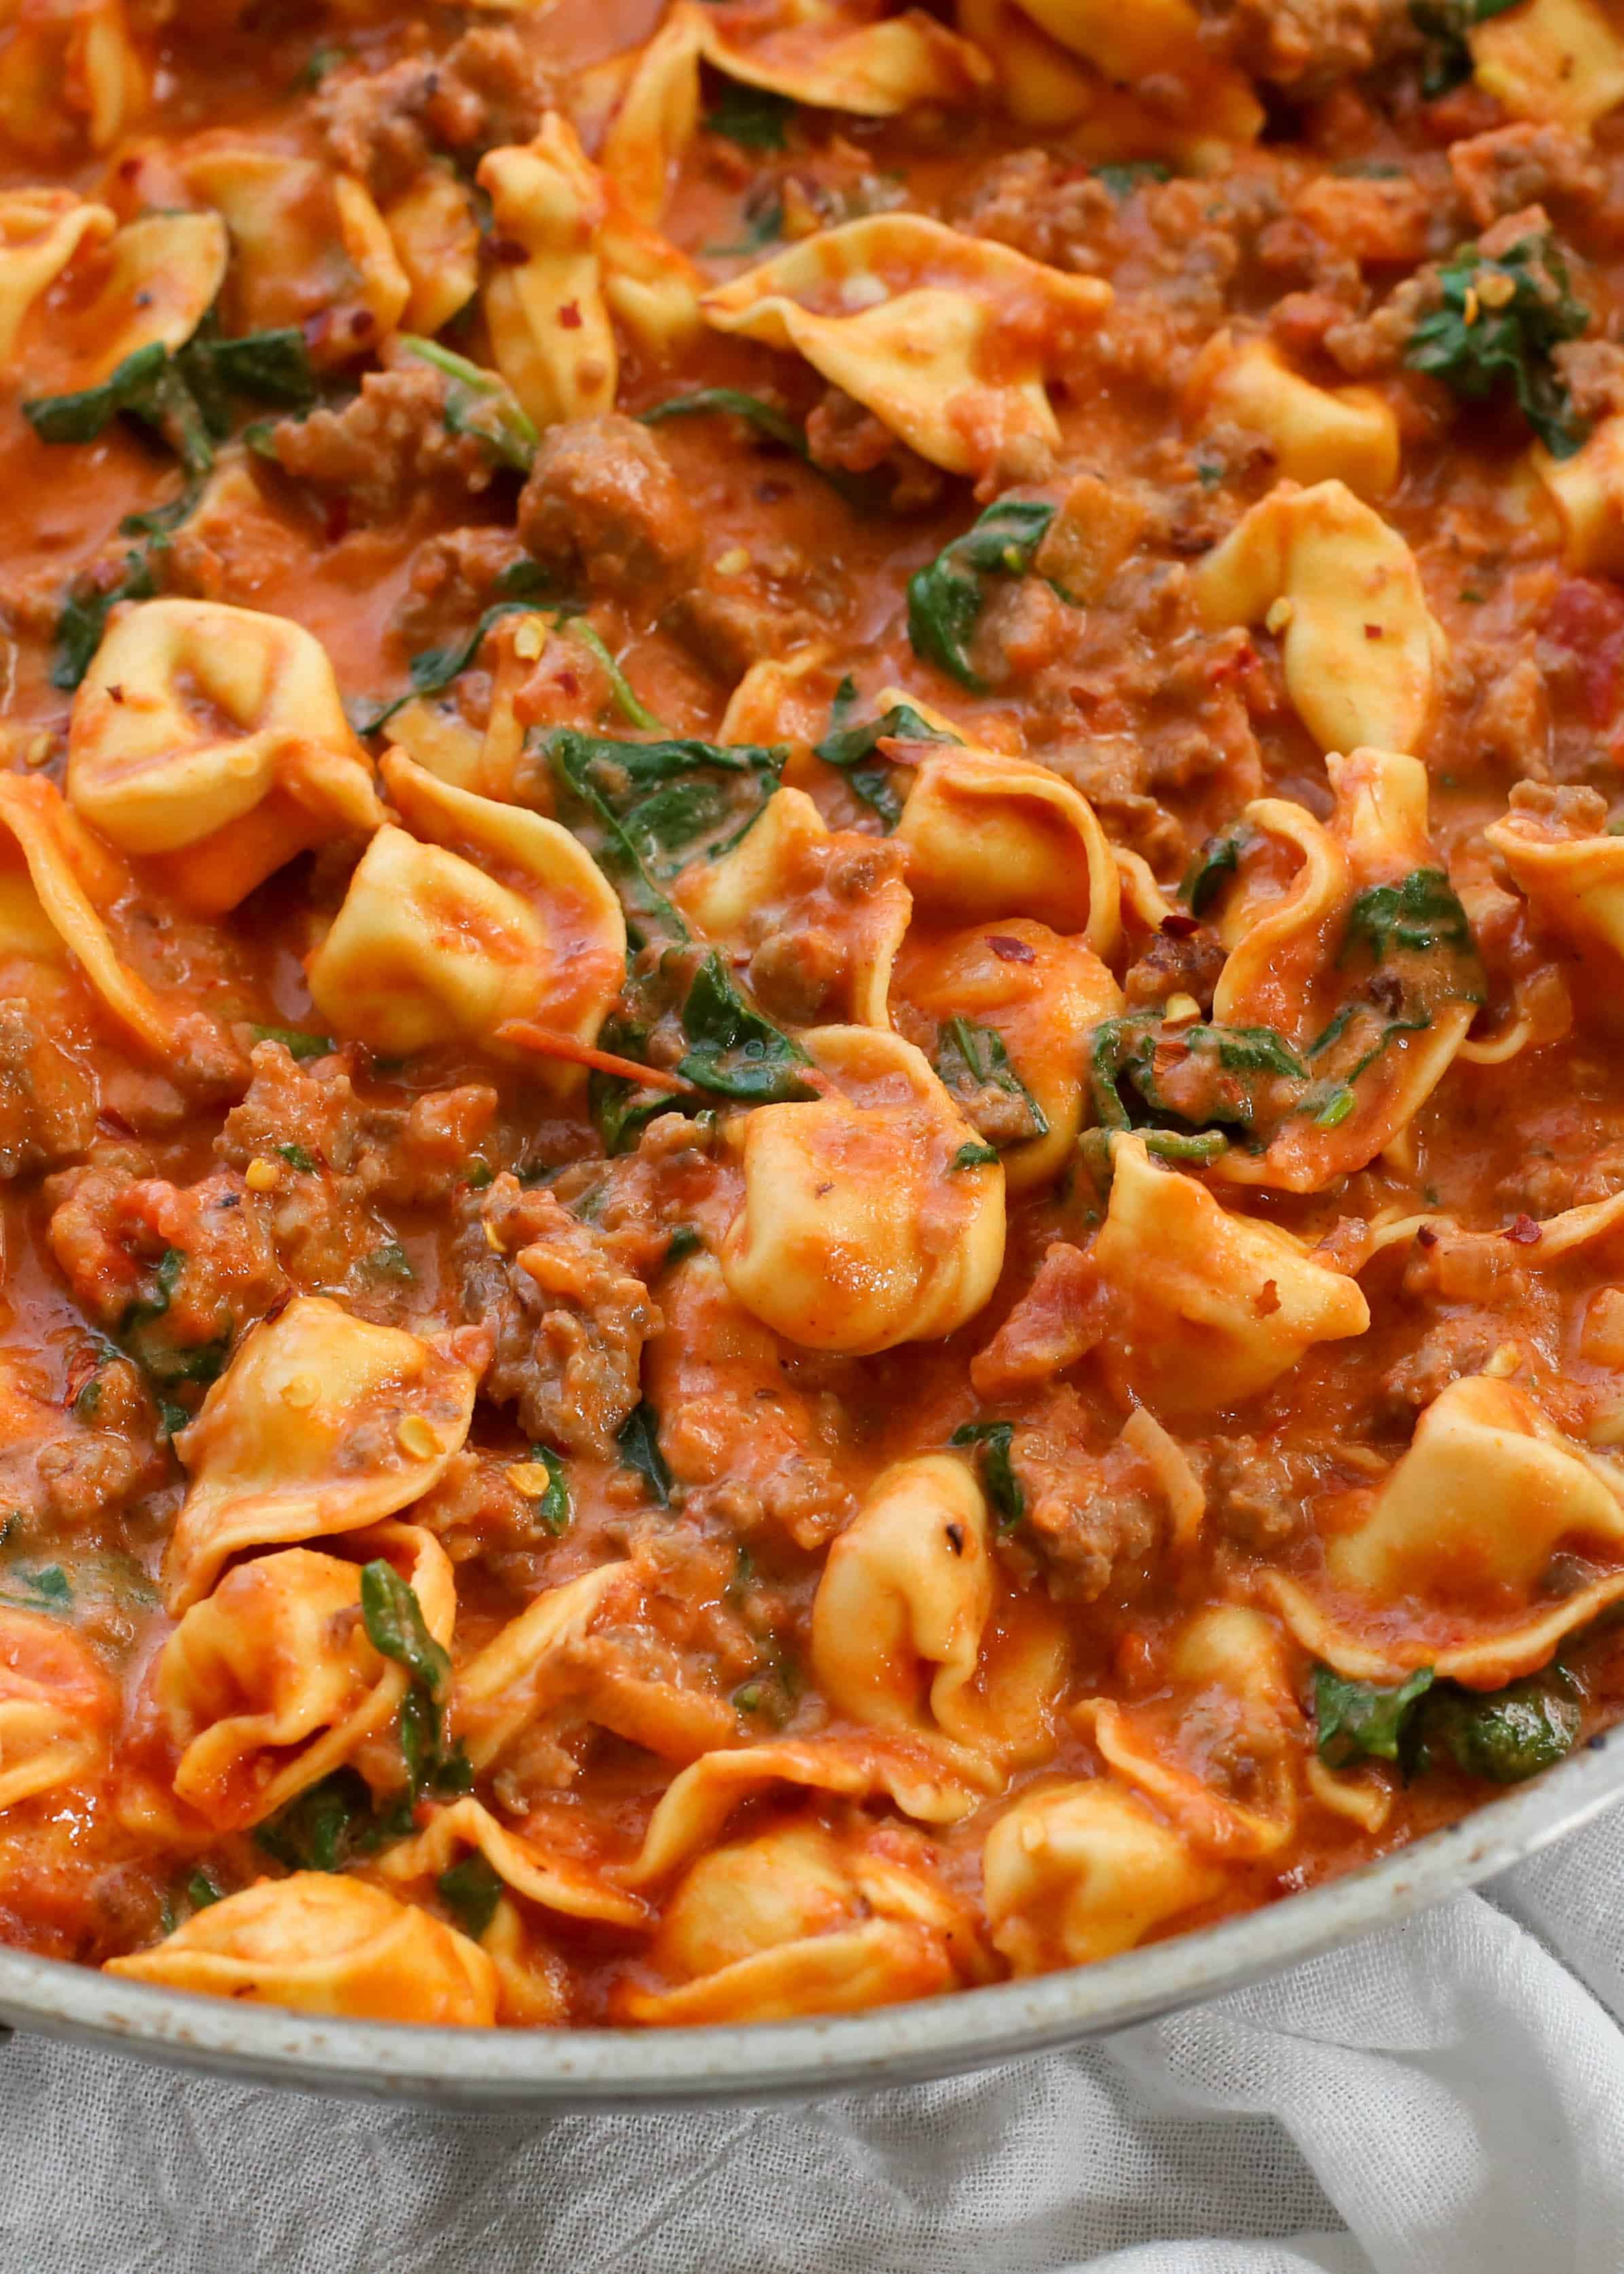 Sausage, Tortellini, and Spinach in a Creamy Tomato Sauce ...